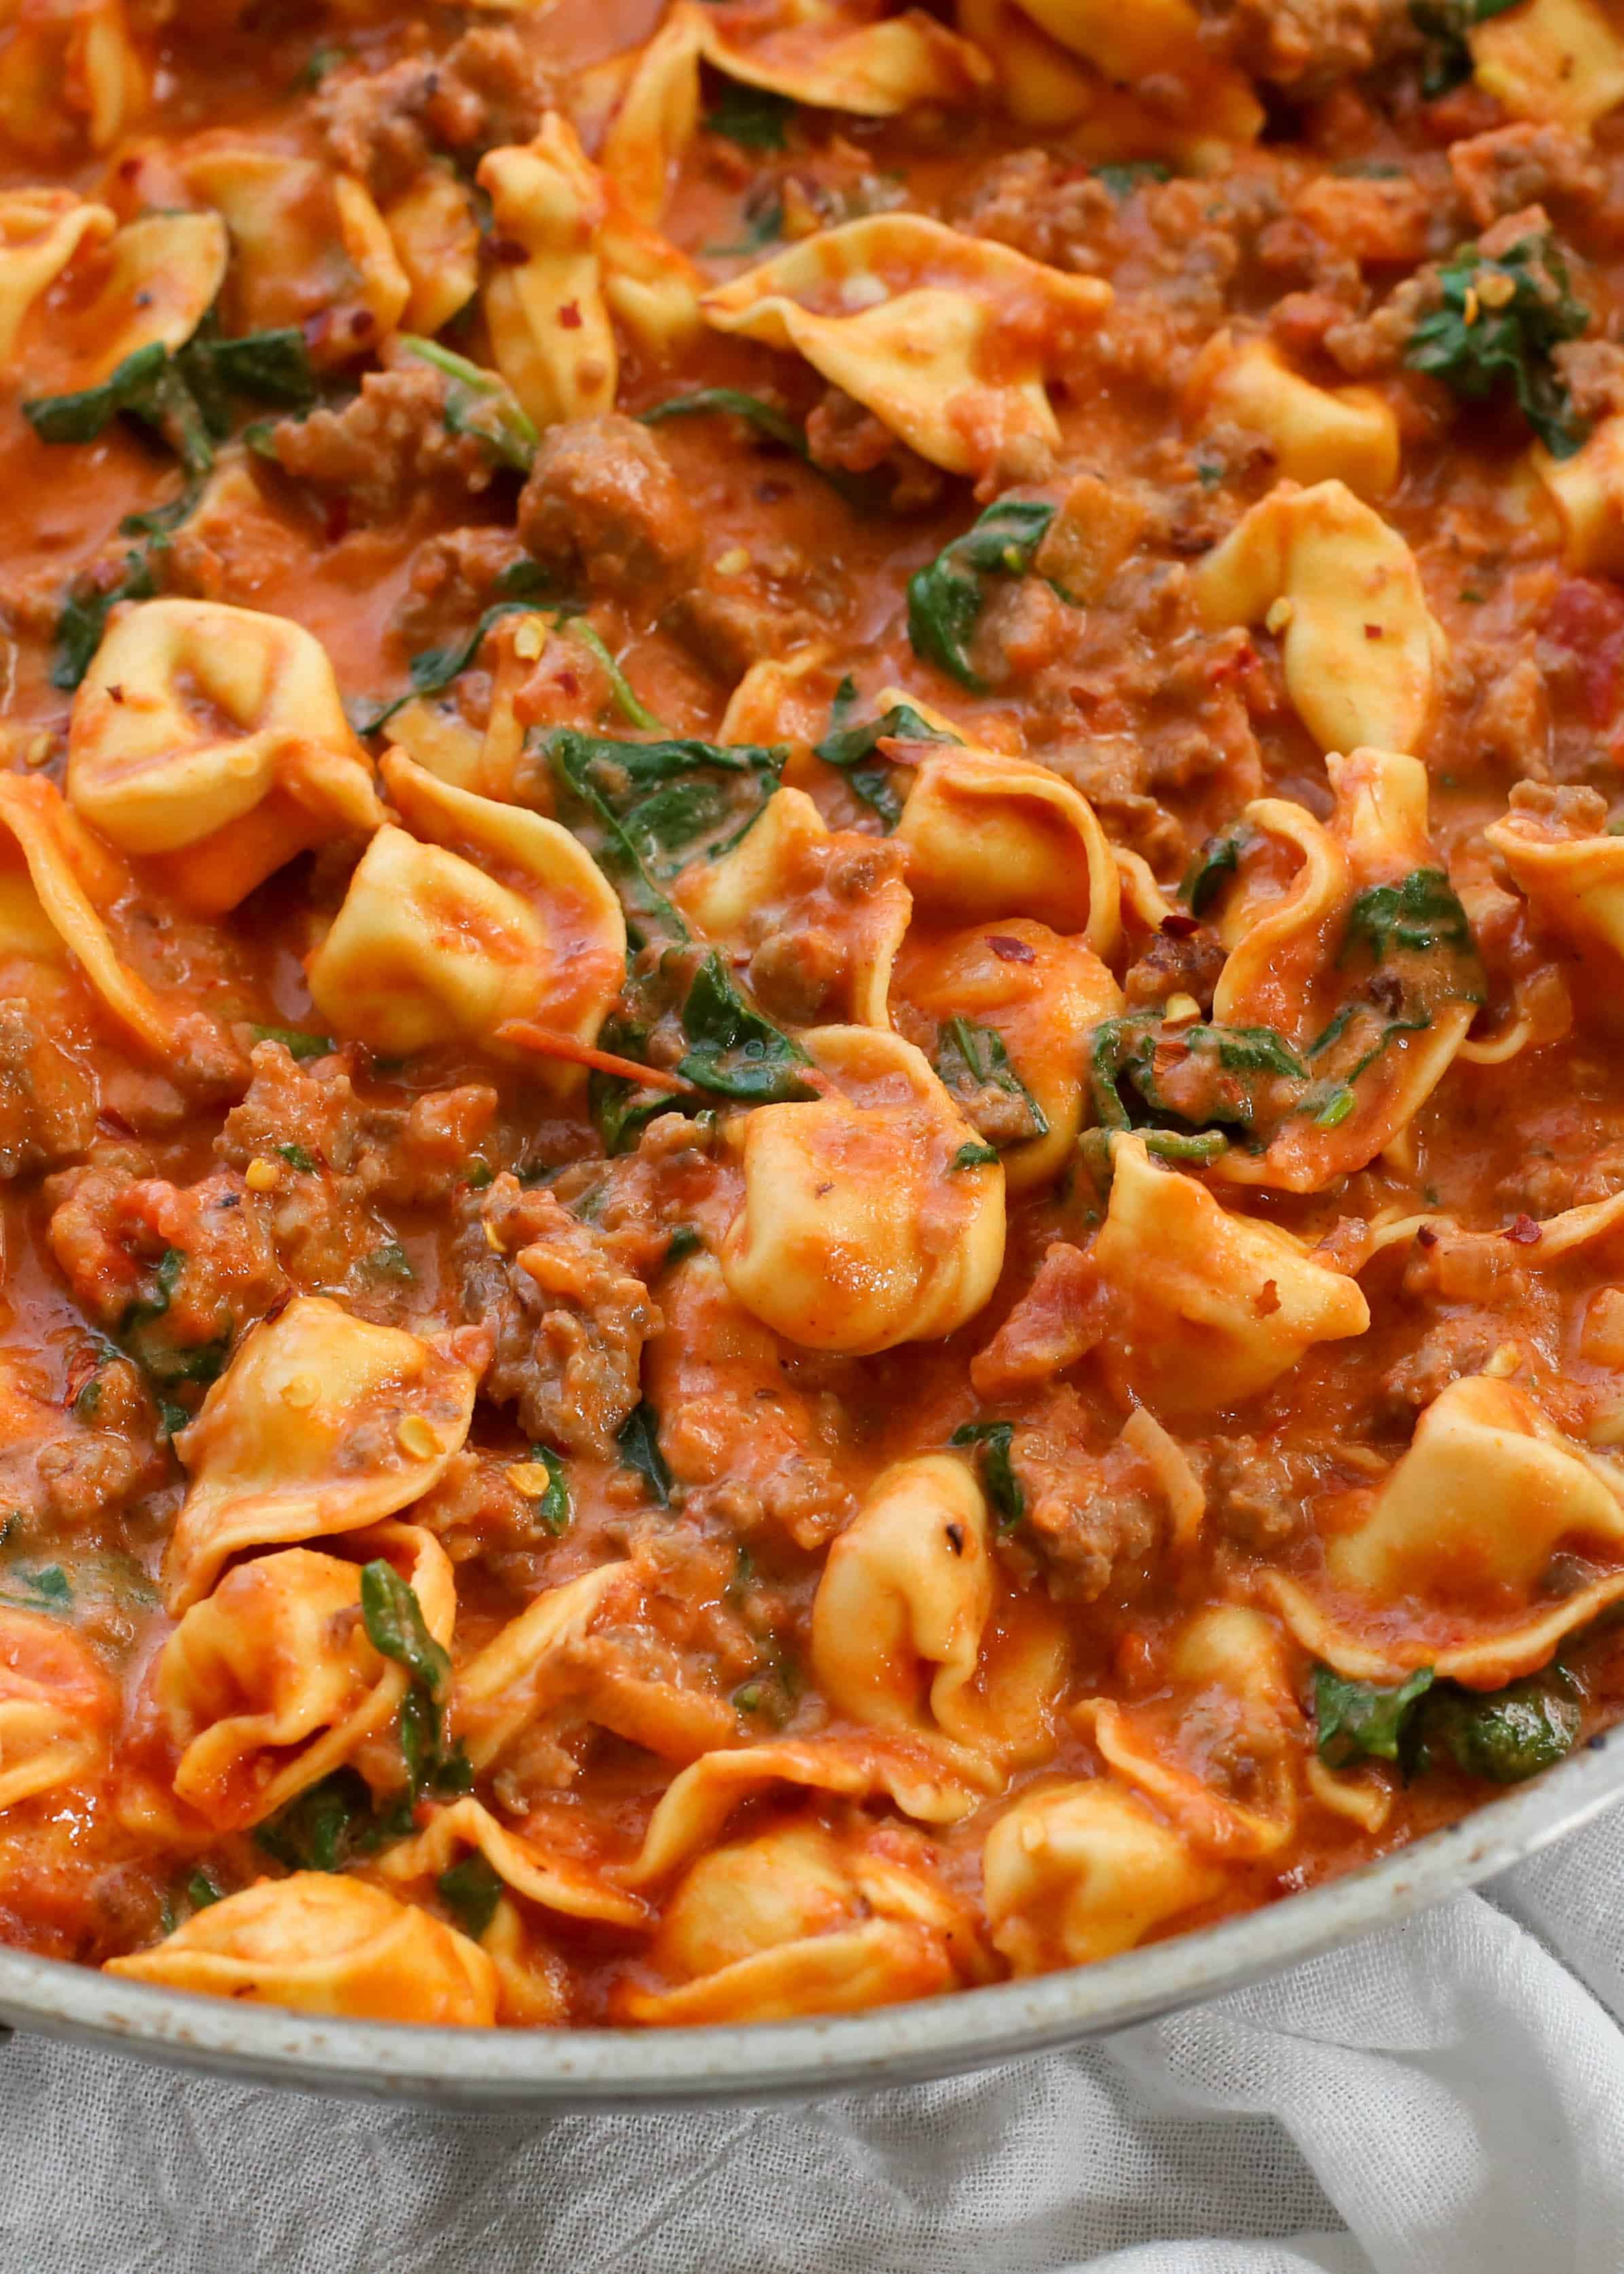 Sausage, Tortellini, and Spinach in a Creamy Tomato Sauce ...